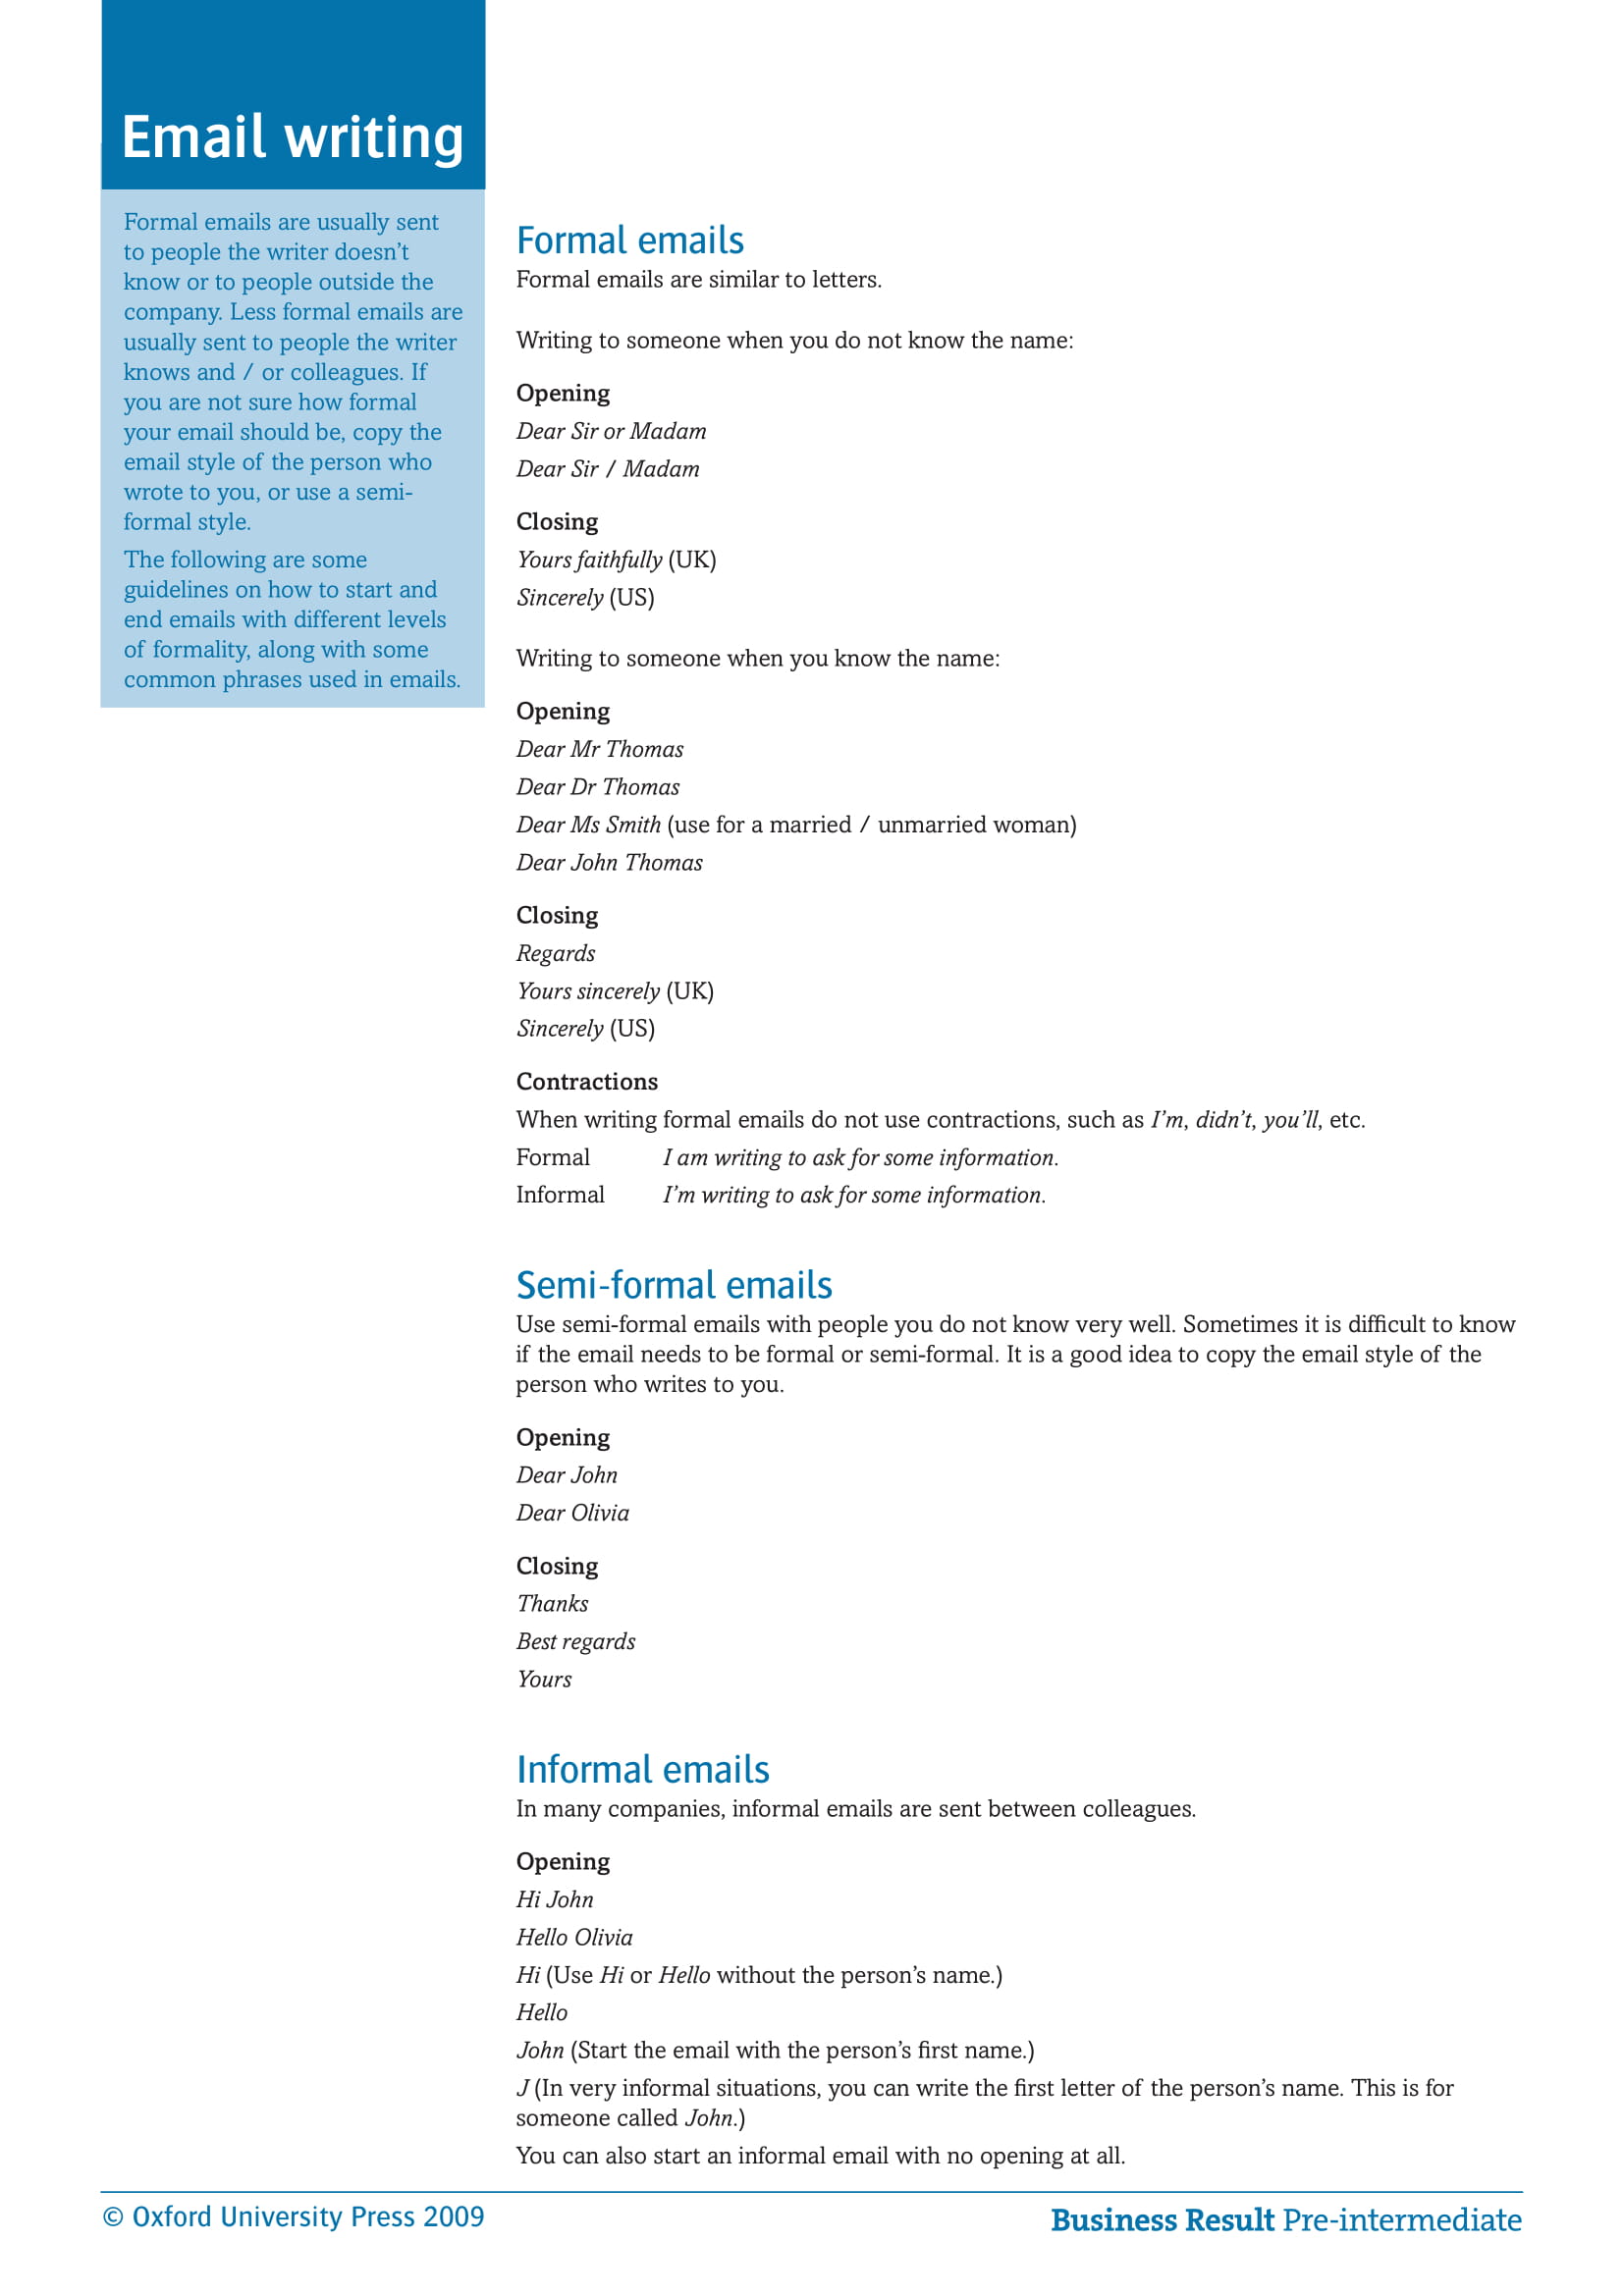 email writing for professional and formal emails example 1